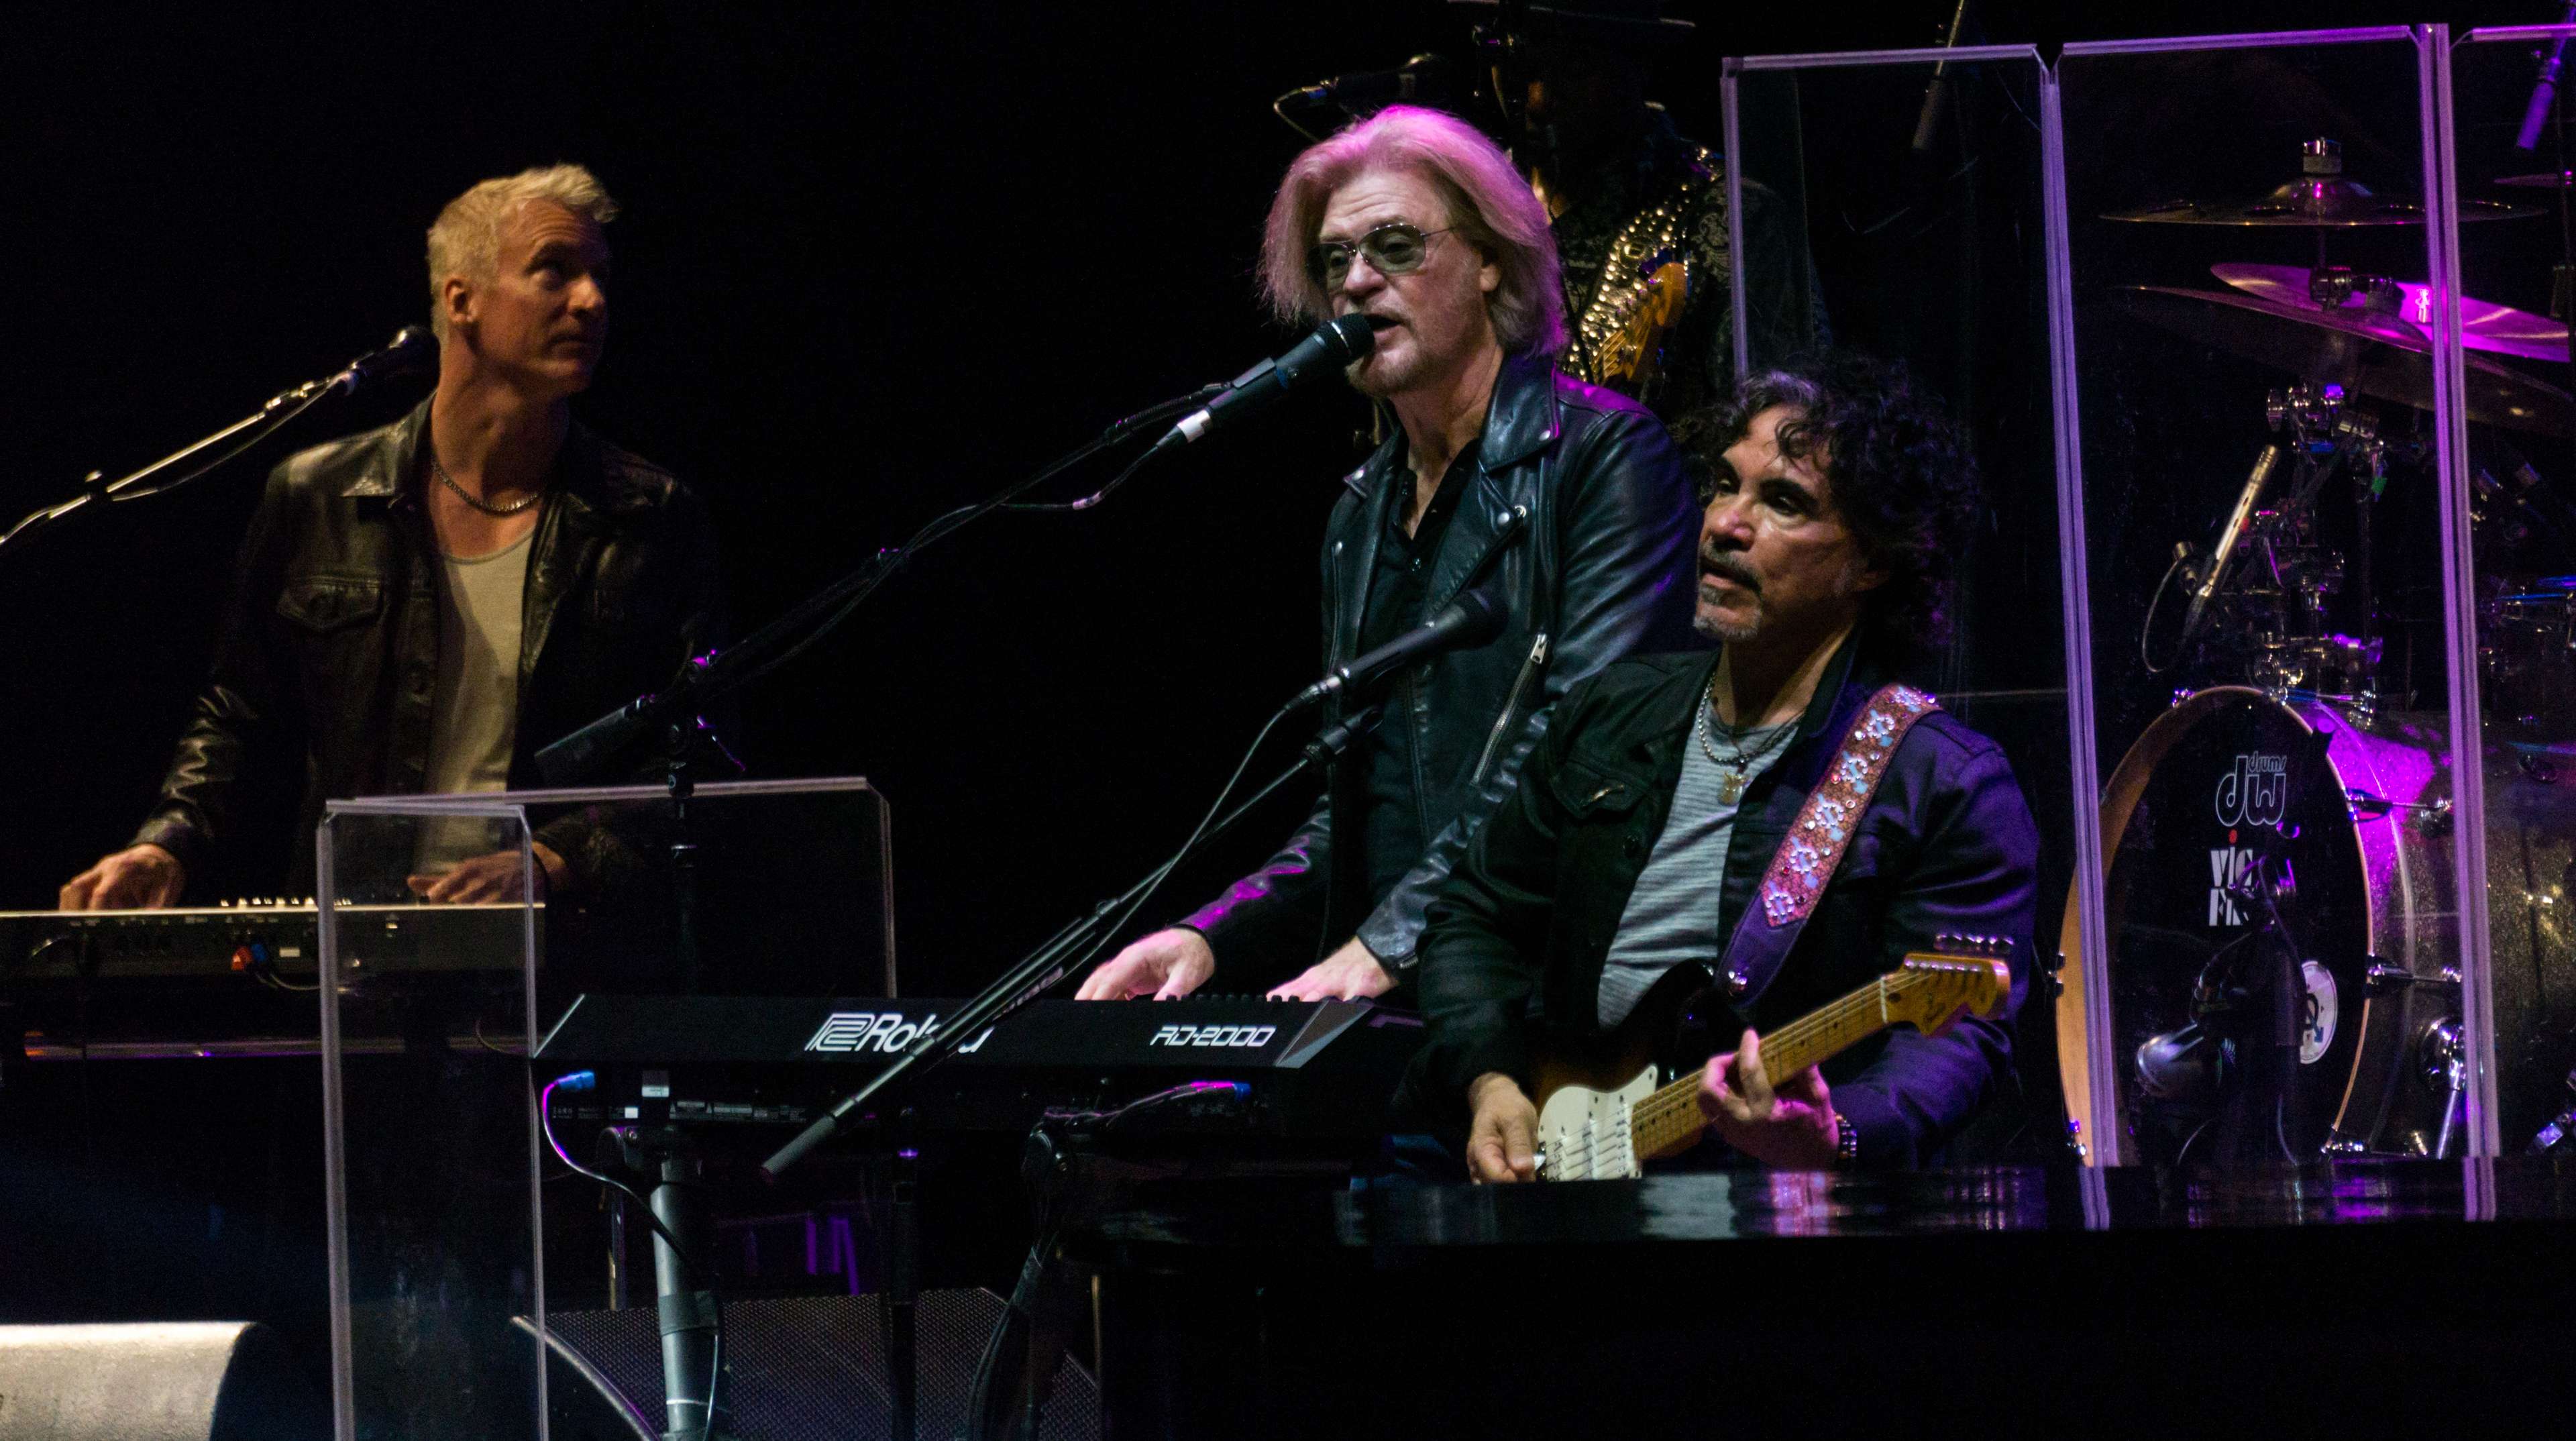 Daryl Hall and John Oates performing onstage in a concert